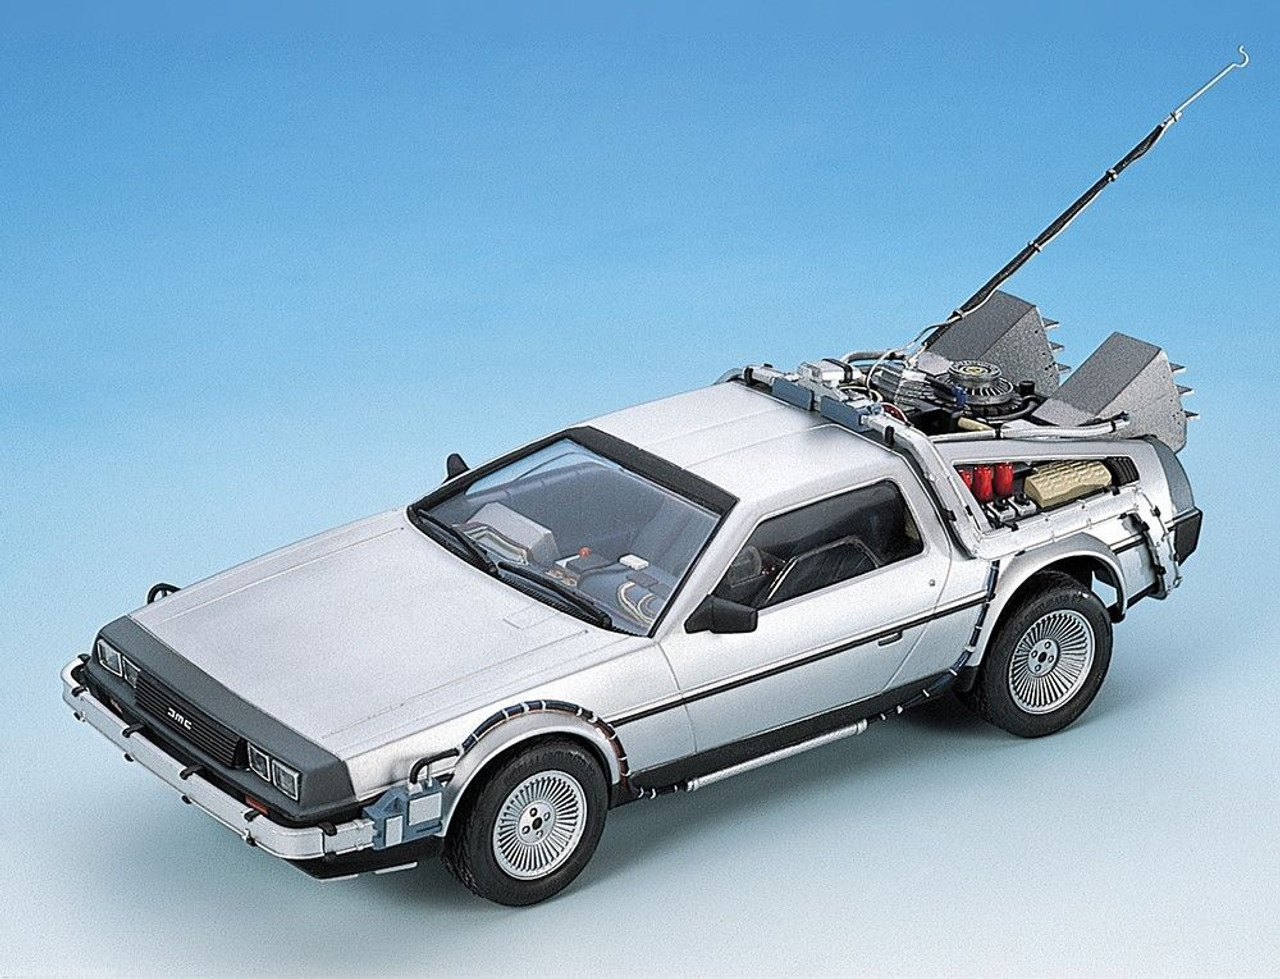 Aoshima 1/24 DeLorean Car Hover Type Back to the Future II w/Engine Details Model Kit